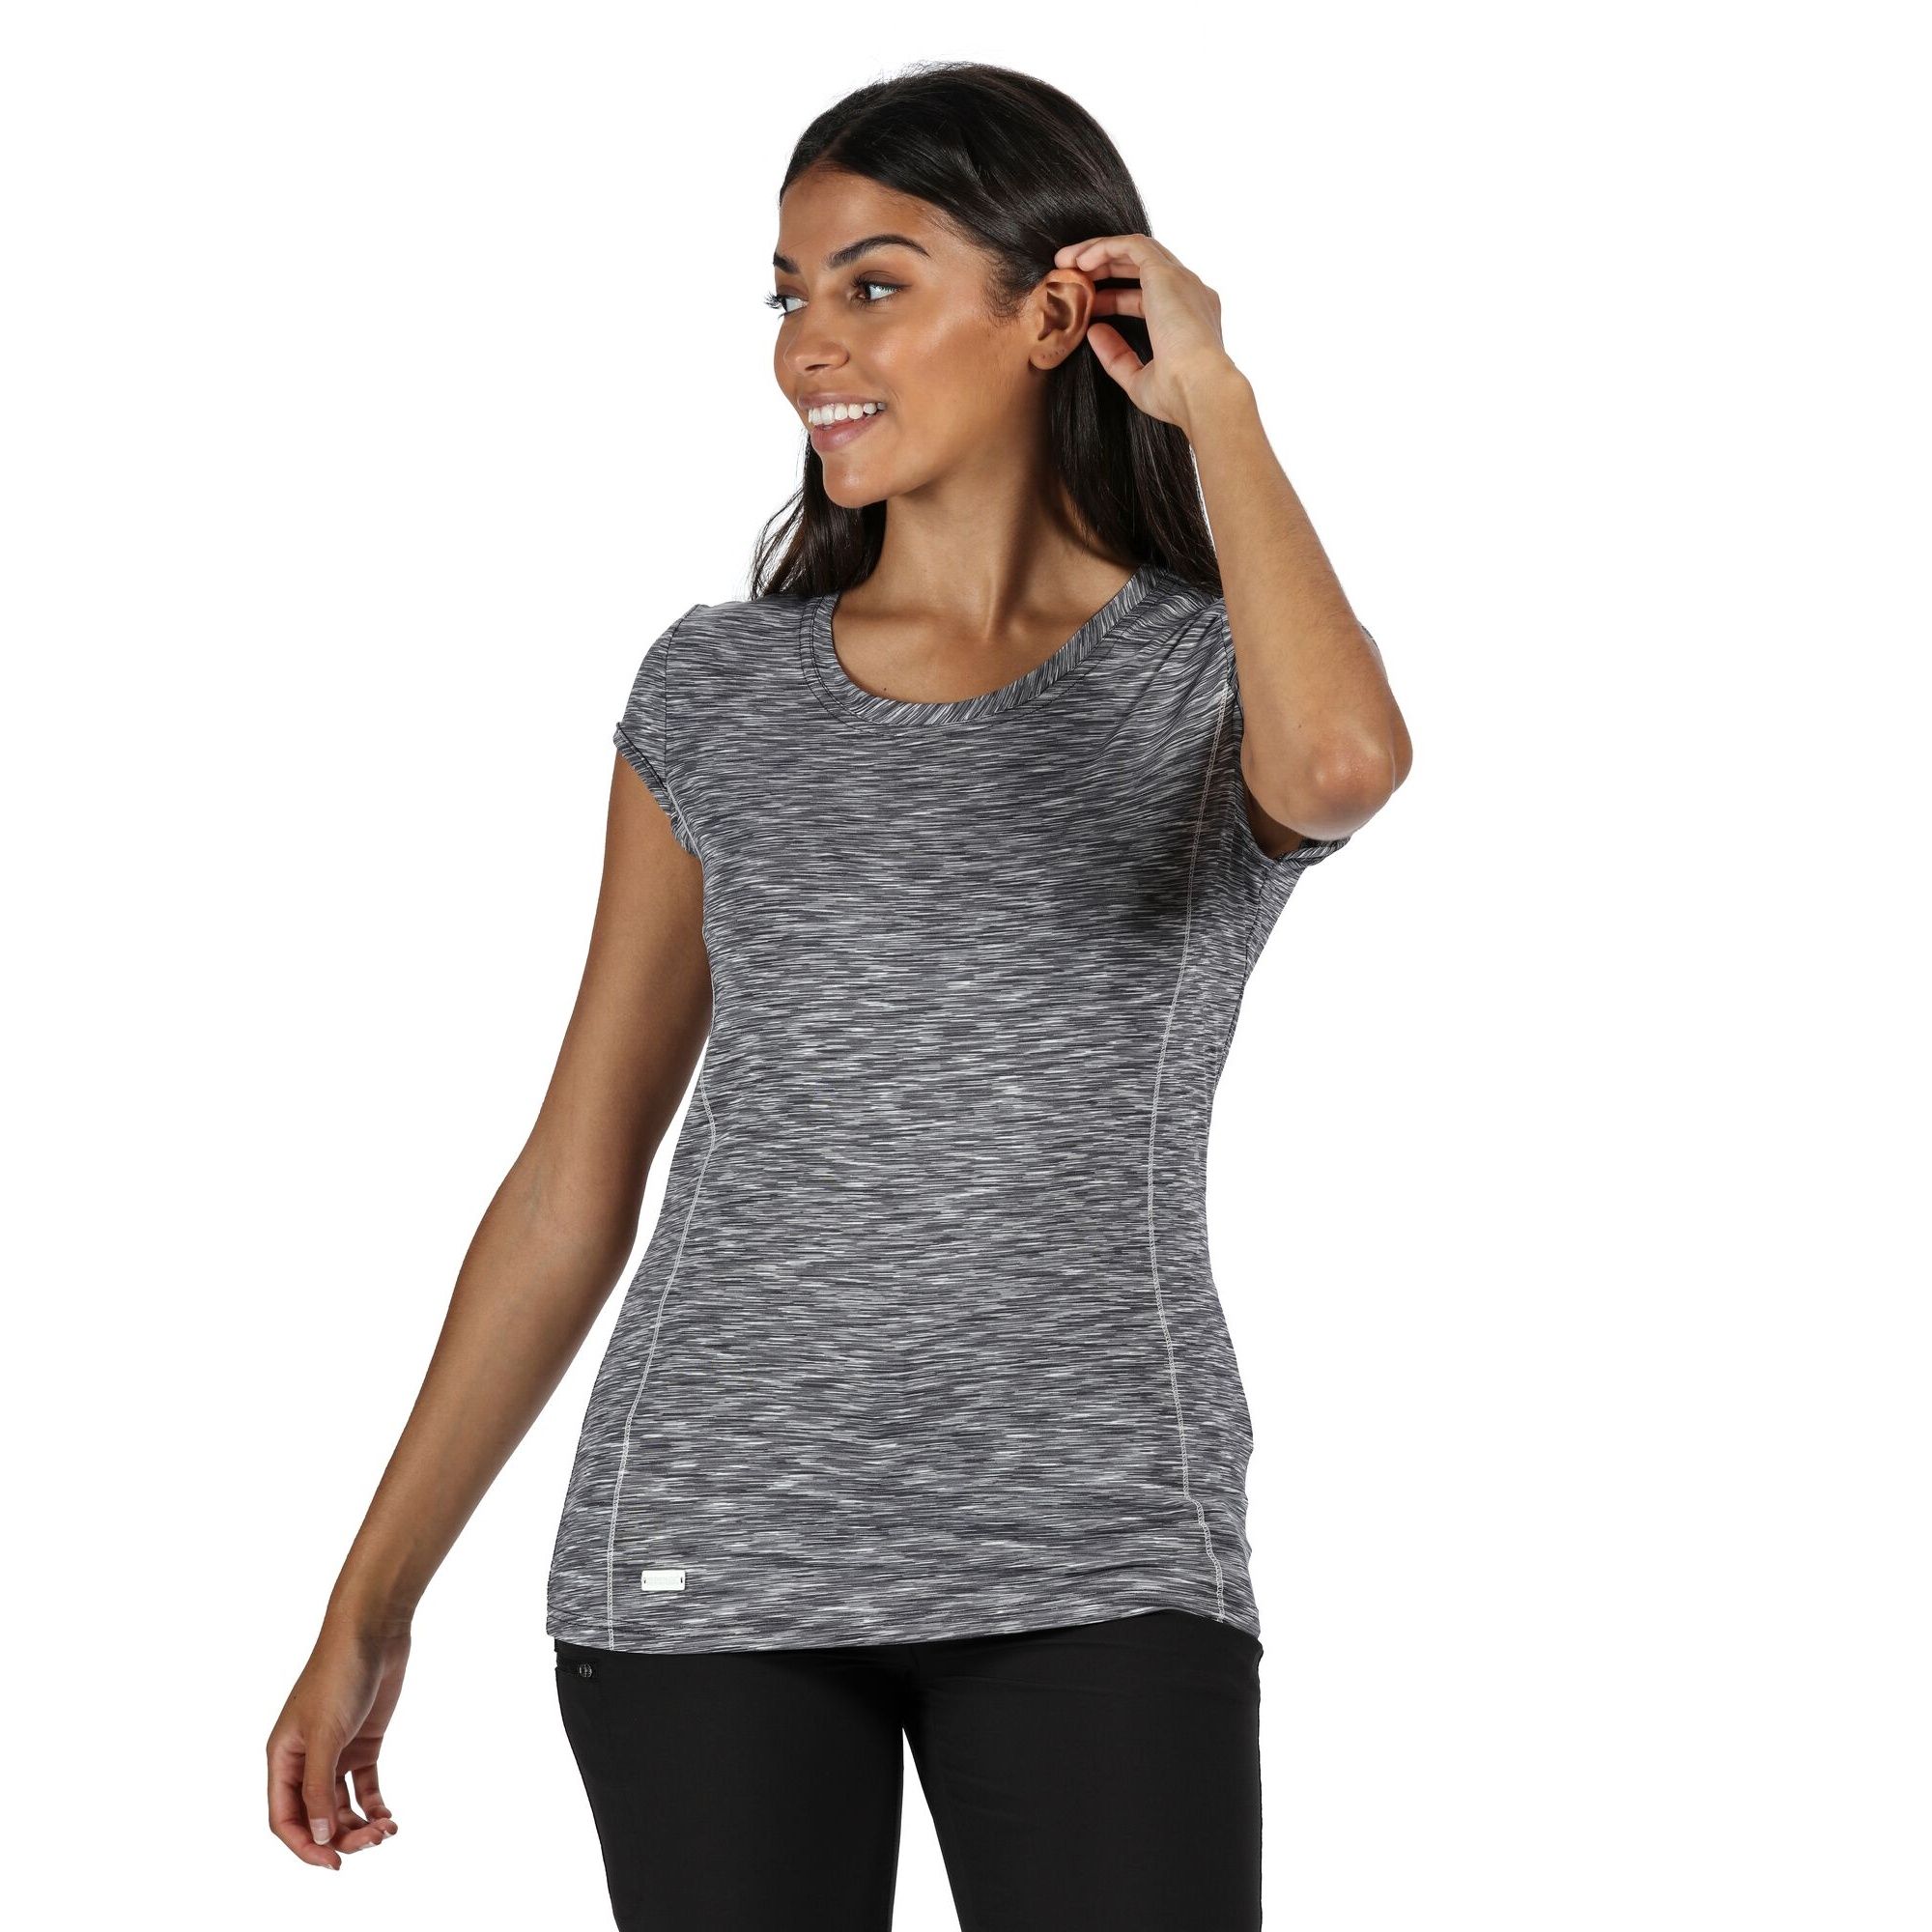 100% polyester. Womens short sleeve t-shirt. Made of soft-touch, marl polyester that efficiently transfers moisture away from your skin for lasting comfort. Designed with a hint of stretch to be form fitting without being tight to allow a natural range of movement during agile hikes and walks. With the Regatta print on the sleeve. Regatta Womens sizing (bust approx): 6 (30in/76cm), 8 (32in/81cm), 10 (34in/86cm), 12 (36in/92cm), 14 (38in/97cm), 16 (40in/102cm), 18 (43in/109cm), 20 (45in/114cm), 22 (48in/122cm), 24 (50in/127cm), 26 (52in/132cm), 28 (54in/137cm), 30 (56in/142cm), 32 (58in/147cm), 34 (60in/152cm), 36 (62in/158cm).